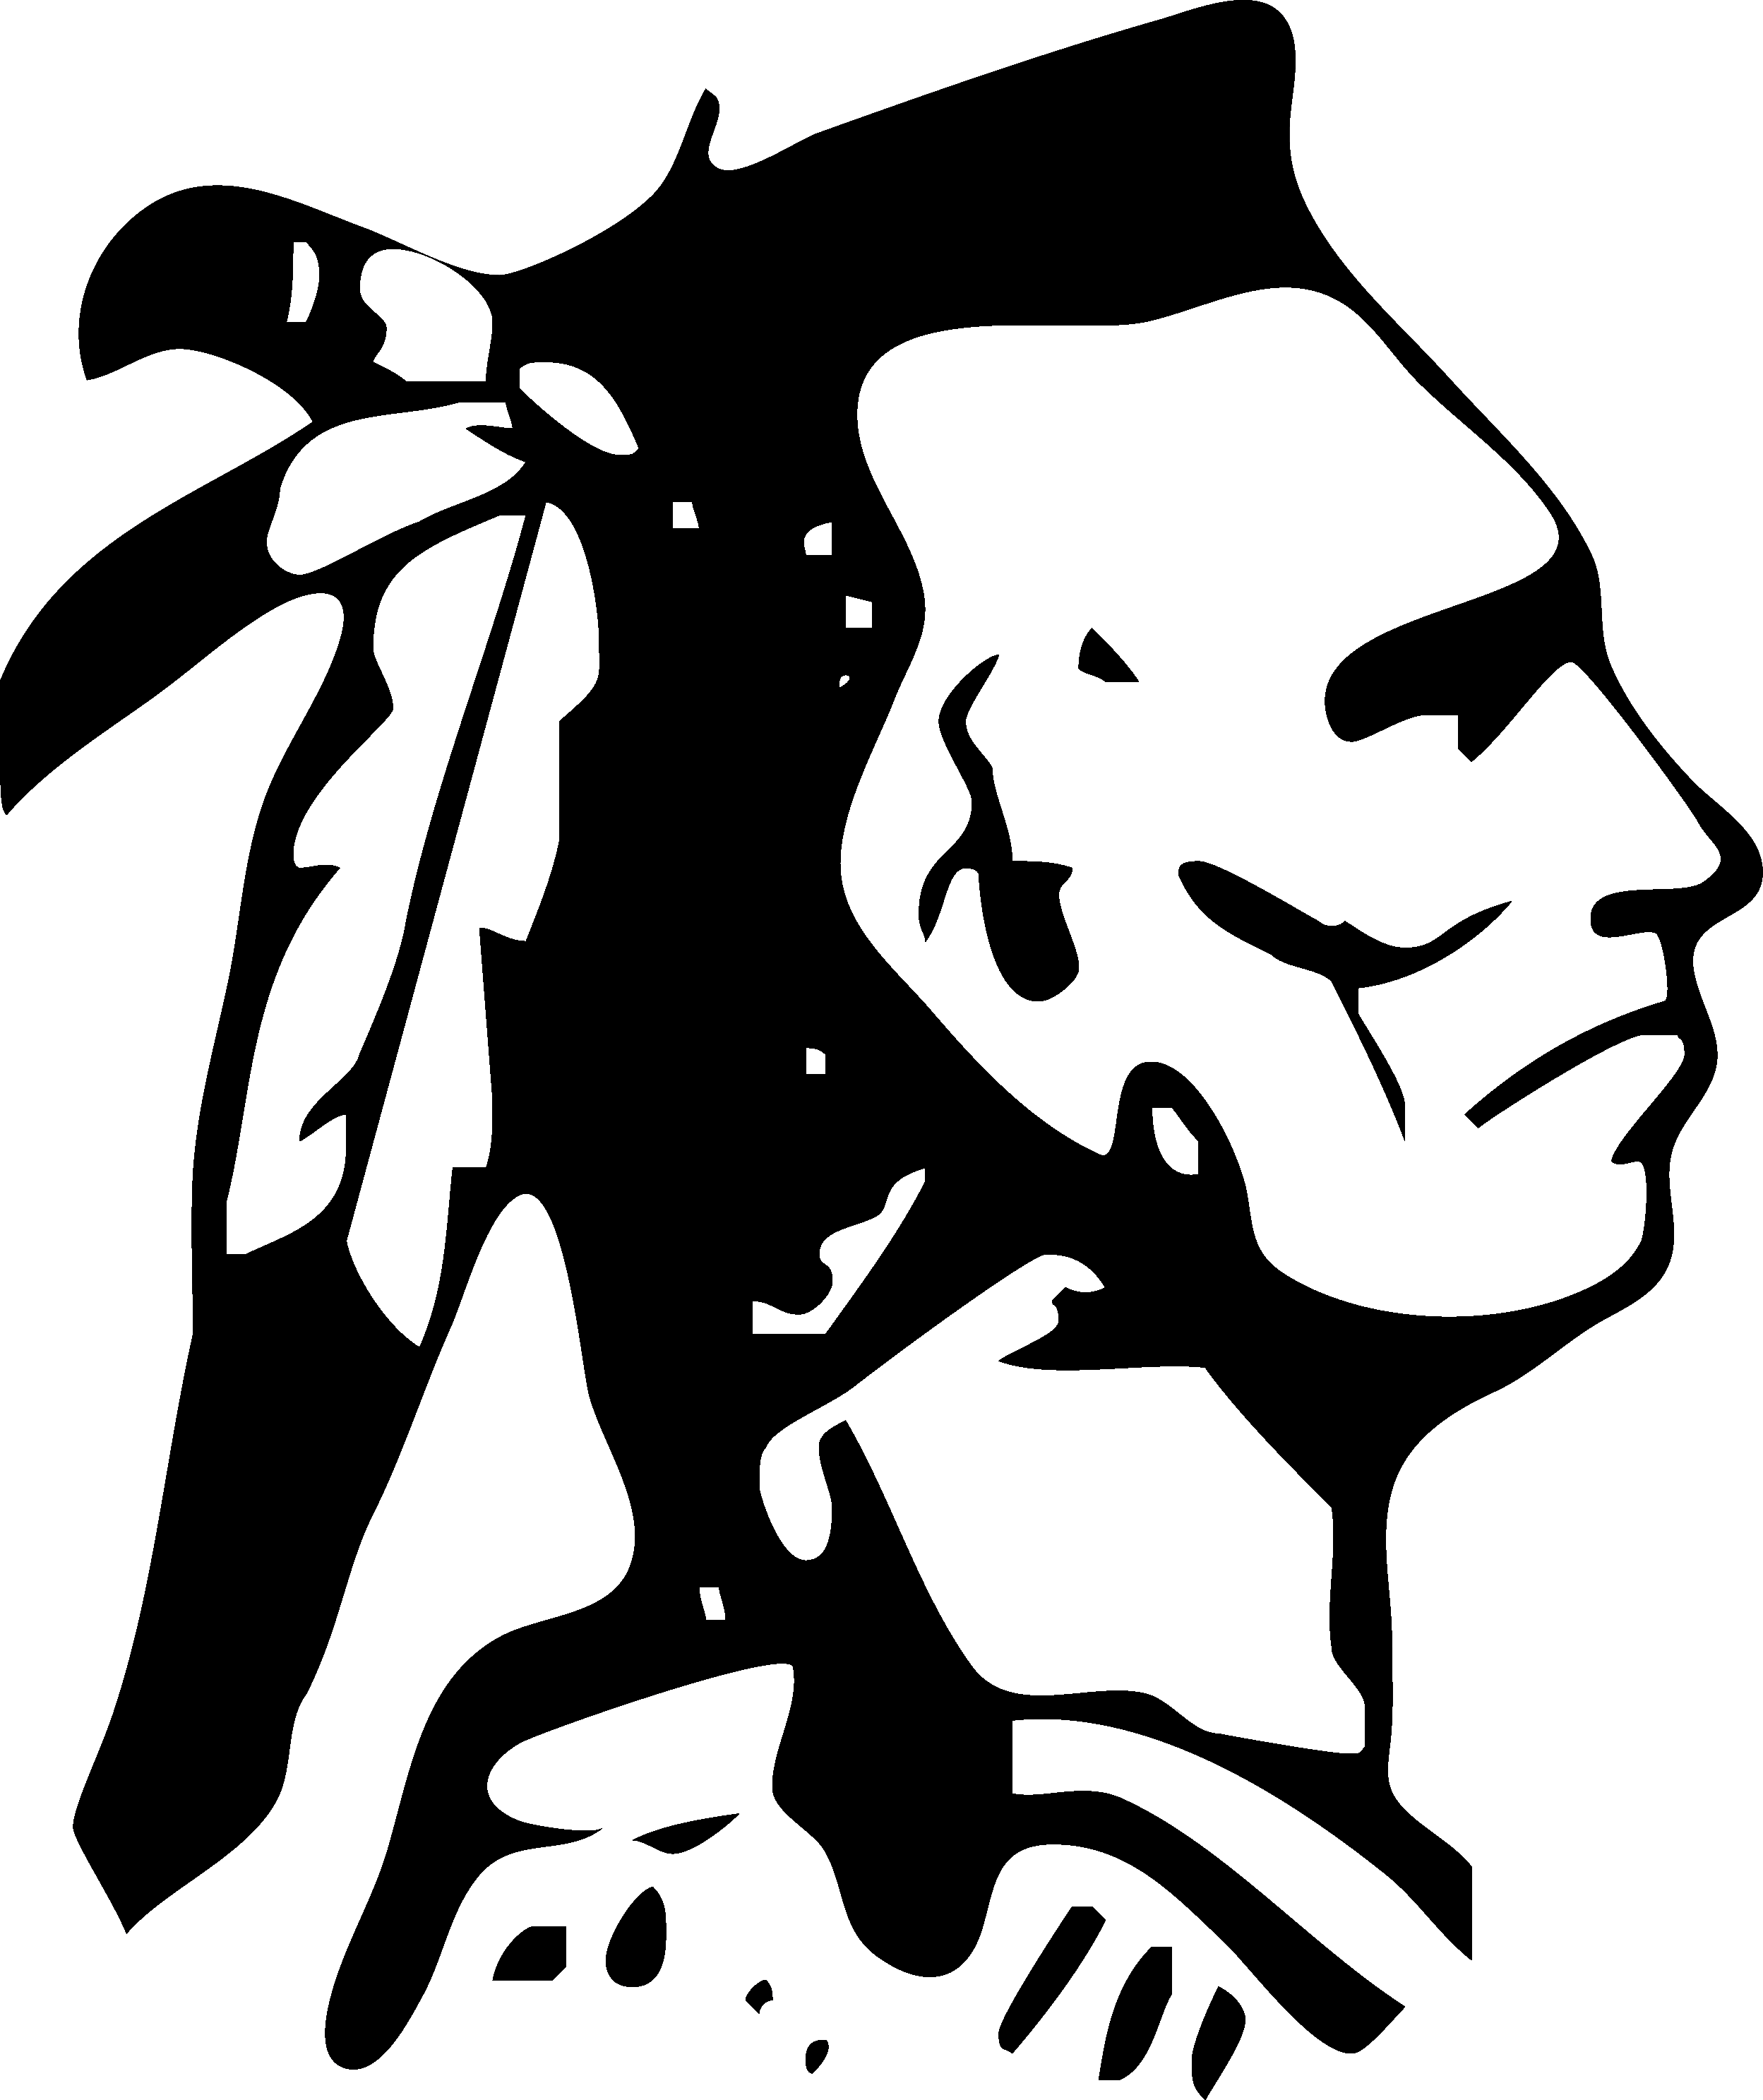 Indian Black and White Logo - American indian PNG images free download, indians PNG